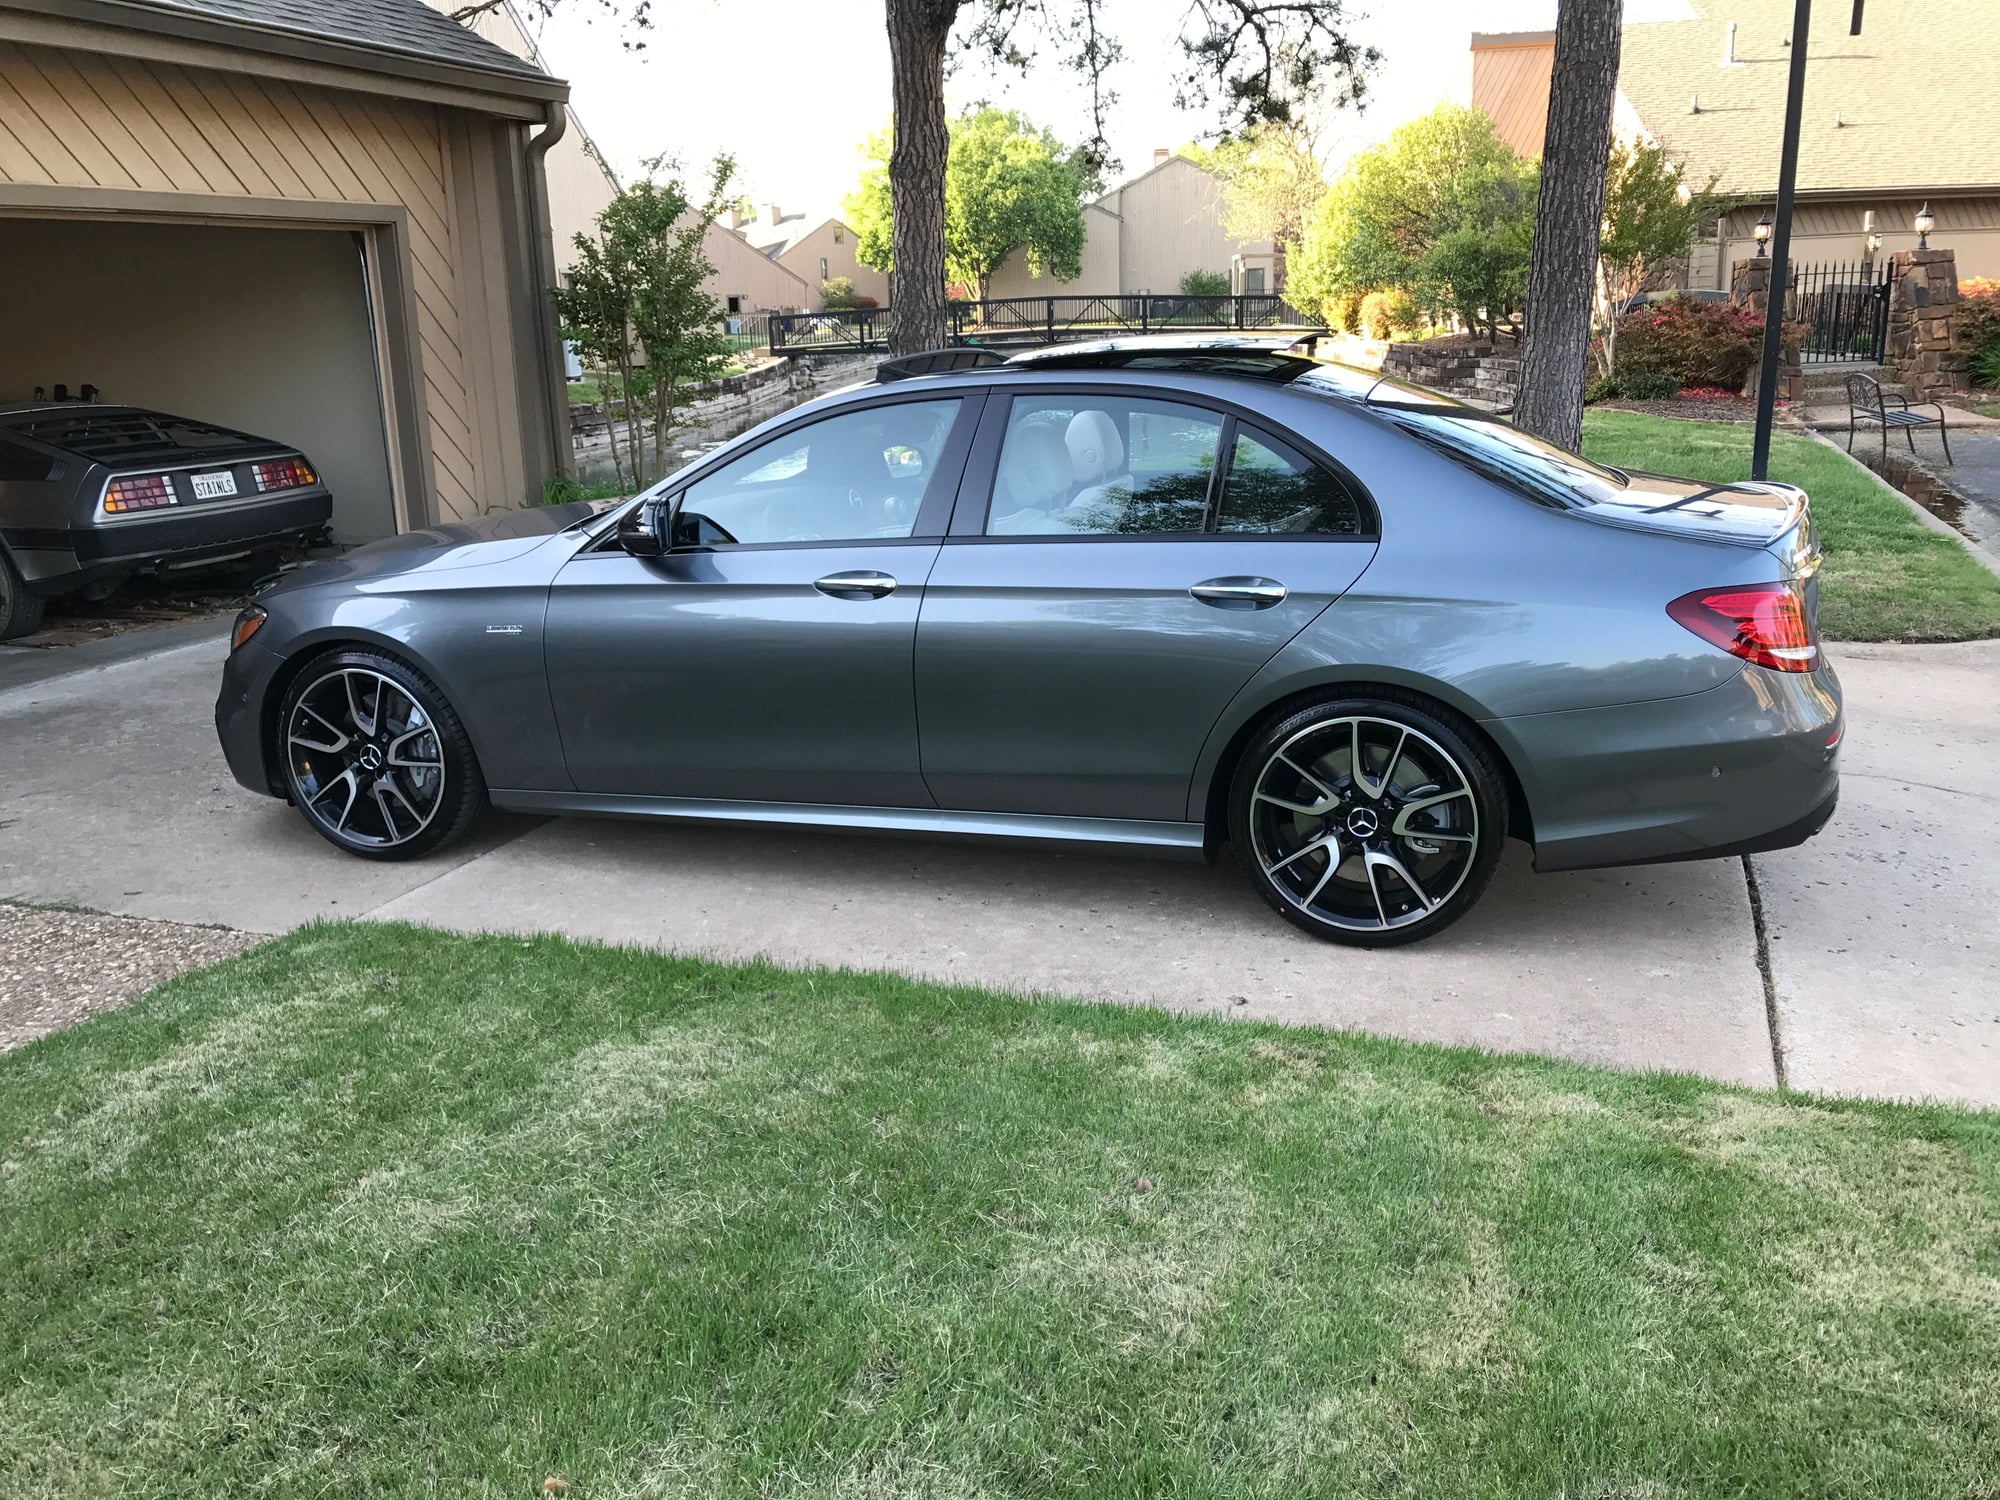 2017 Amg E43 Loaded Nice Buy Or Take Over Lease Mbworld Org Forums